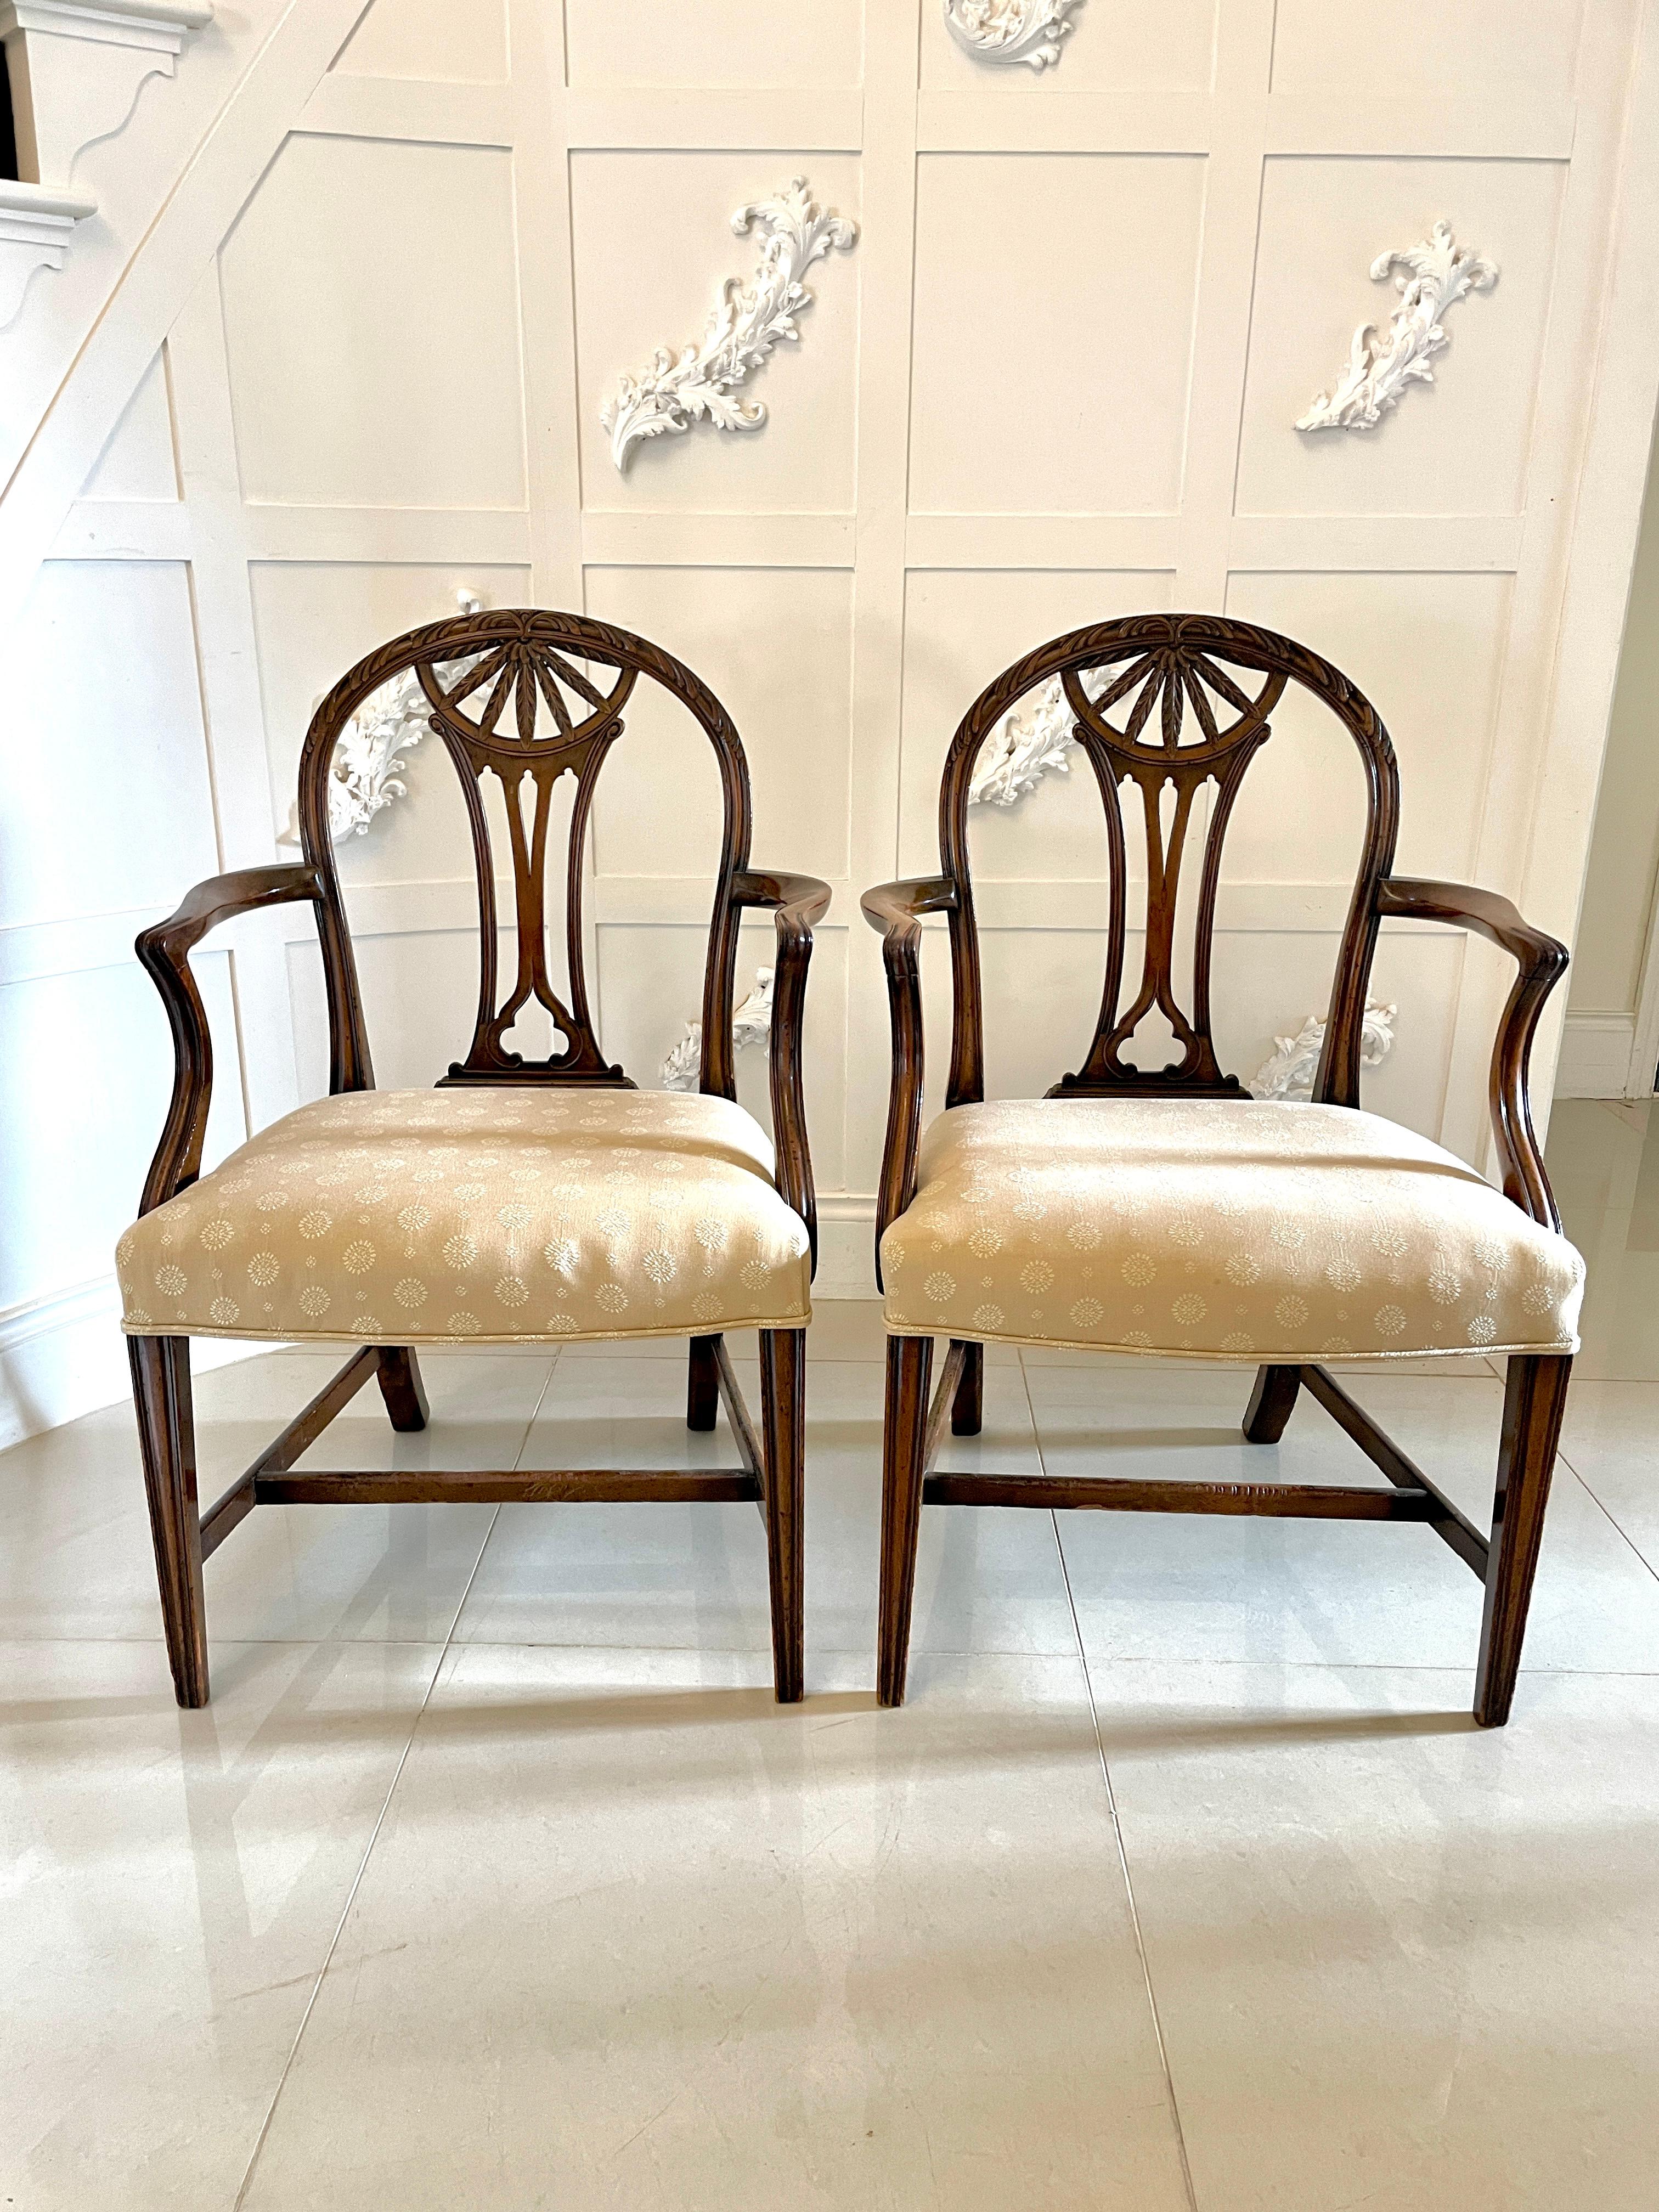 Pair of antique 19th century quality carved mahogany desk chairs having quality carved mahogany shaped backs with a carved pierced centre splat standing on square tapering moulded legs and out swept back legs united by mahogany stretchers.

We are